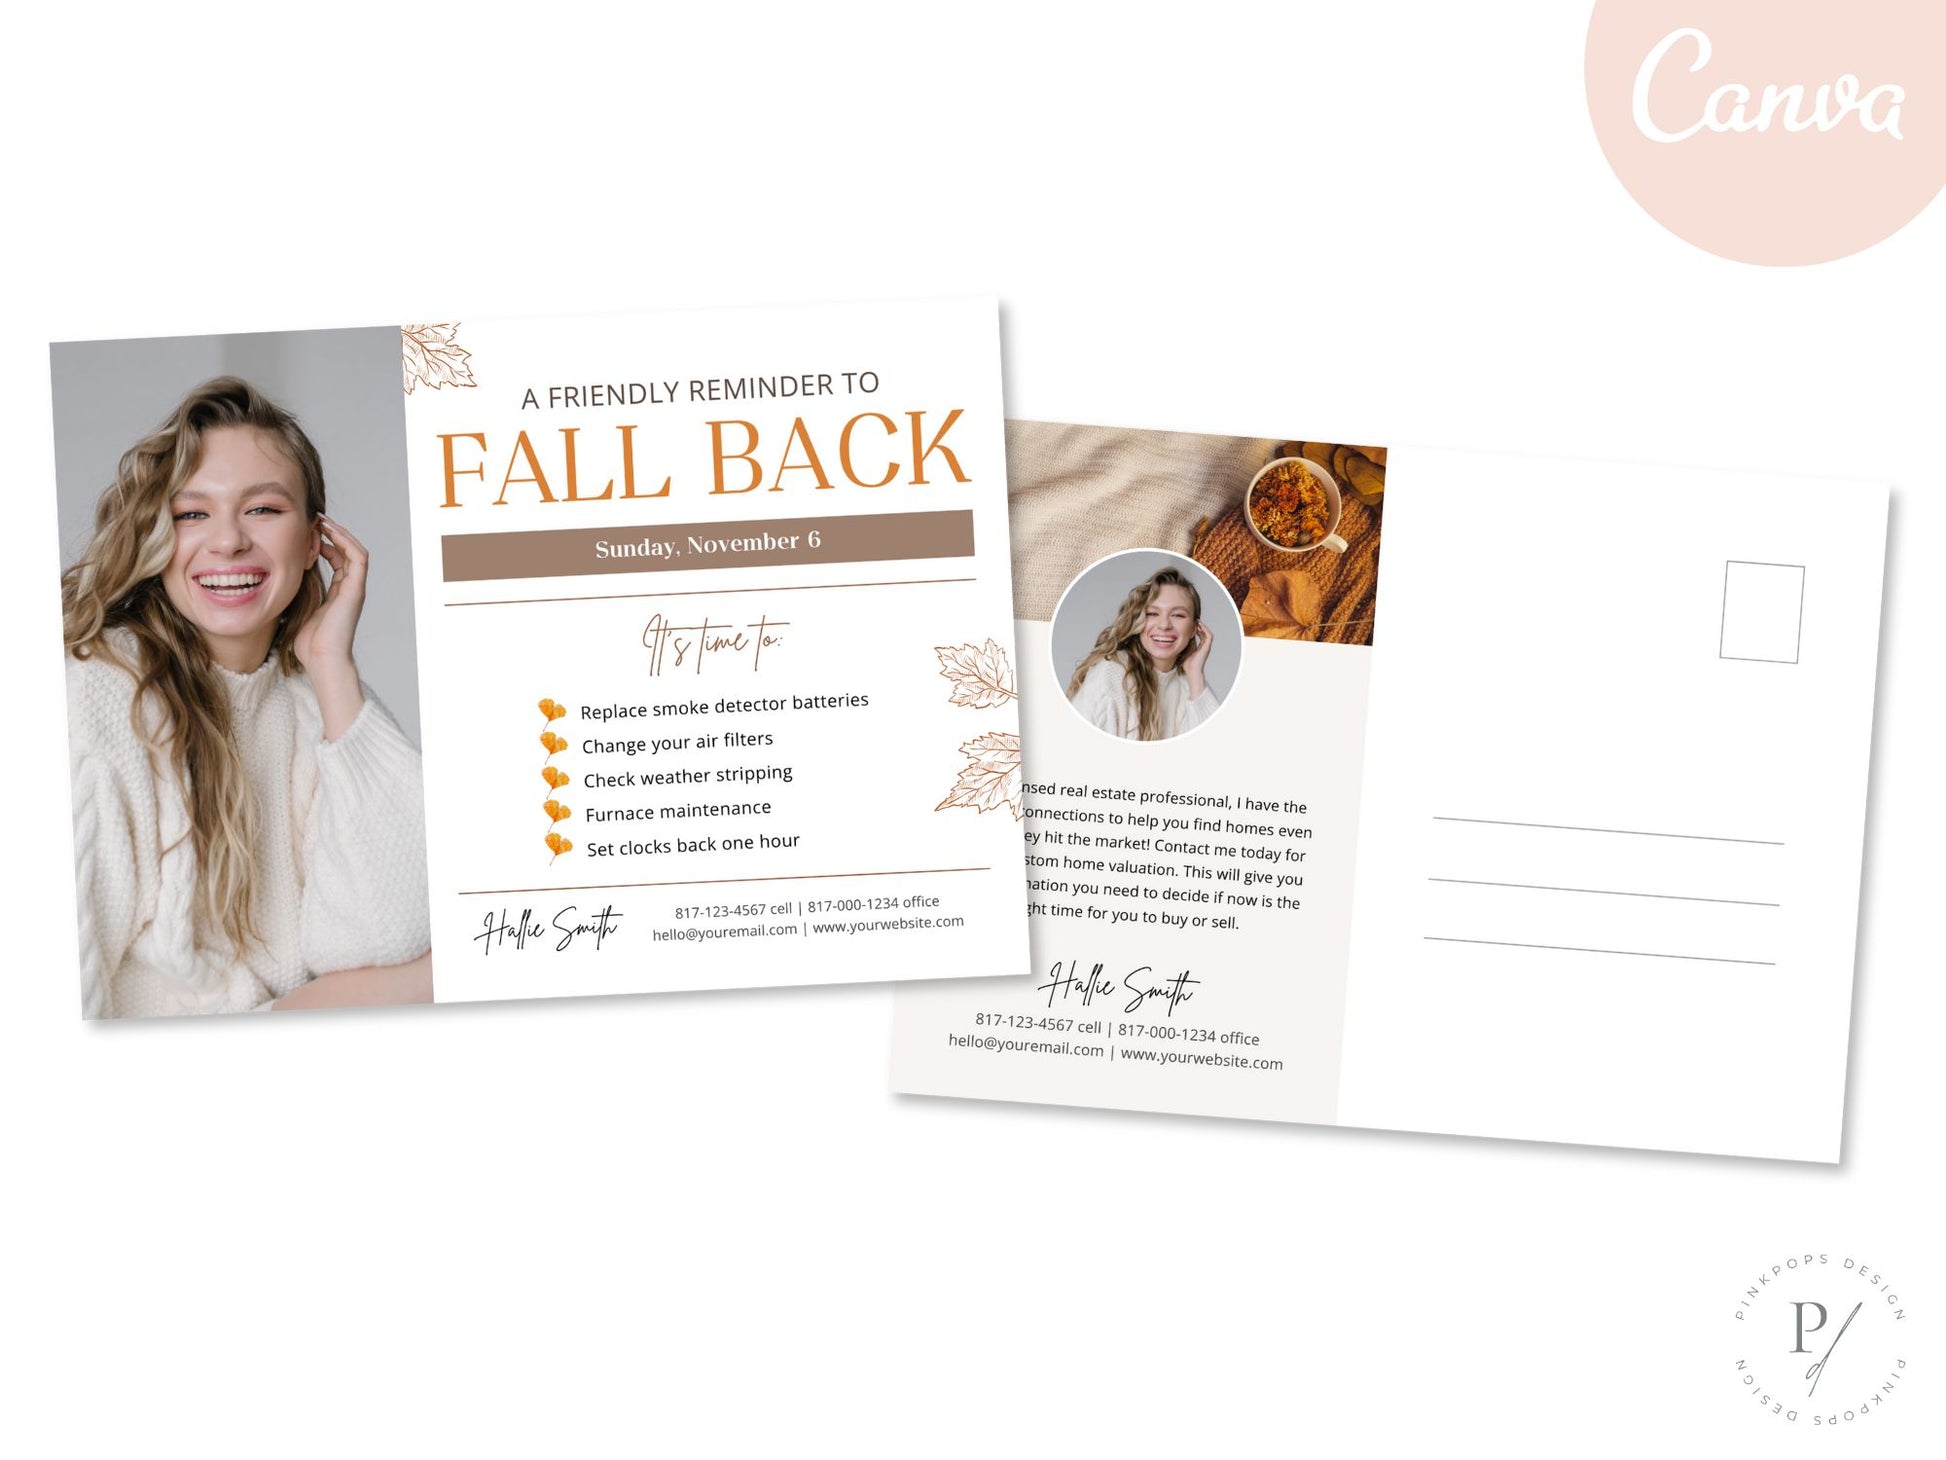 Real Estate Fall Back Postcard Vol 02 - Captivating design for reminding clients about the time change and showcasing your real estate brand in the autumn season.